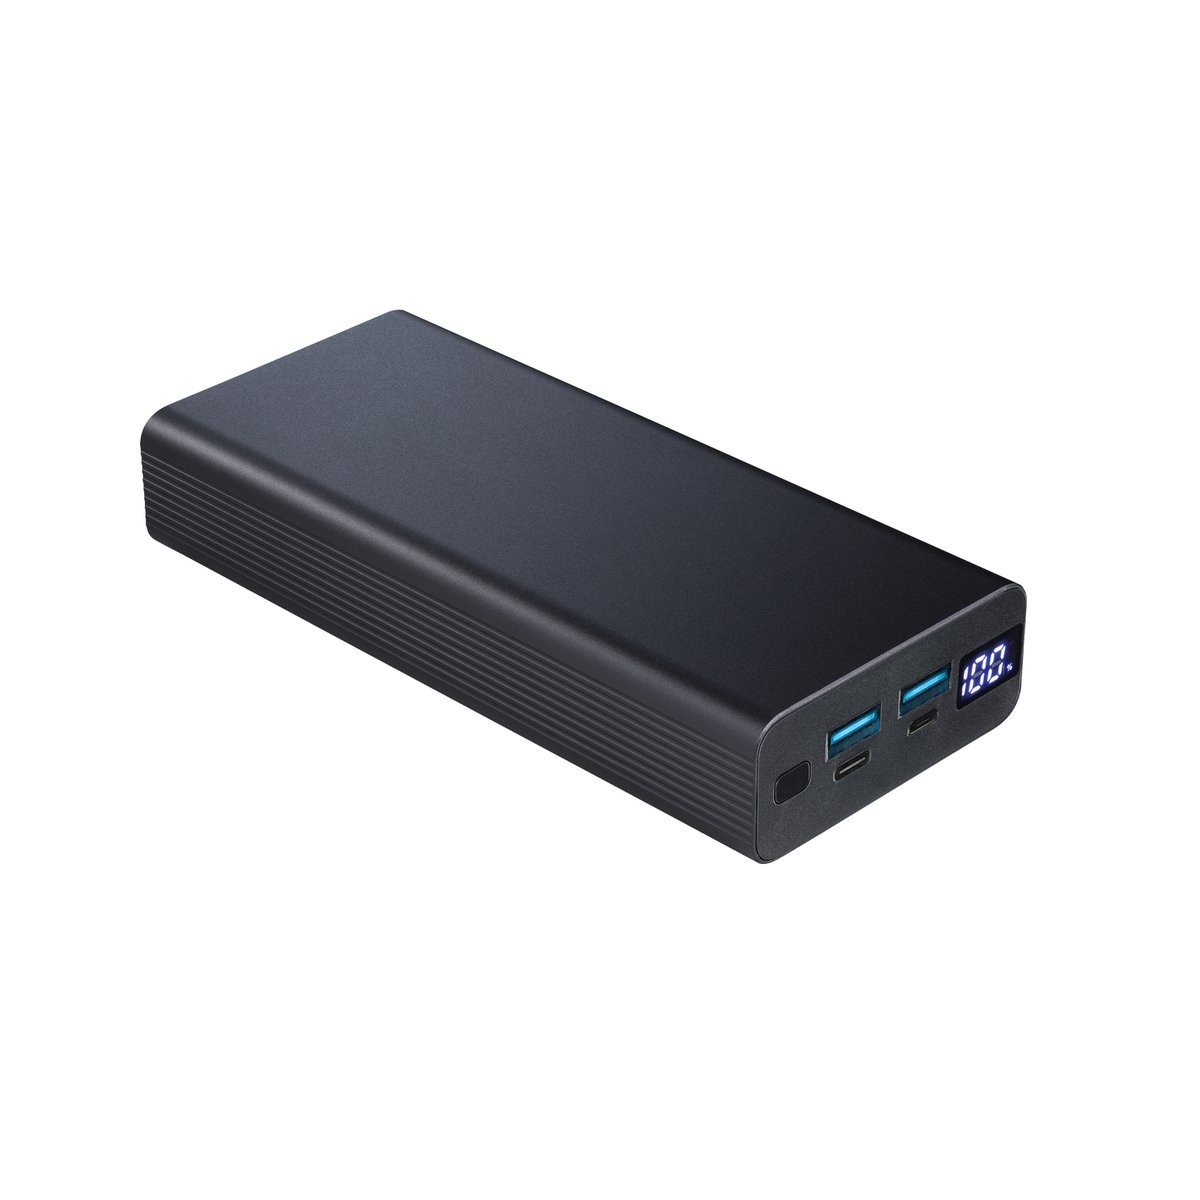 Powerbank with Fast Charge and Power Delivery REEVES-GUYMON dark grey 20000 mAh